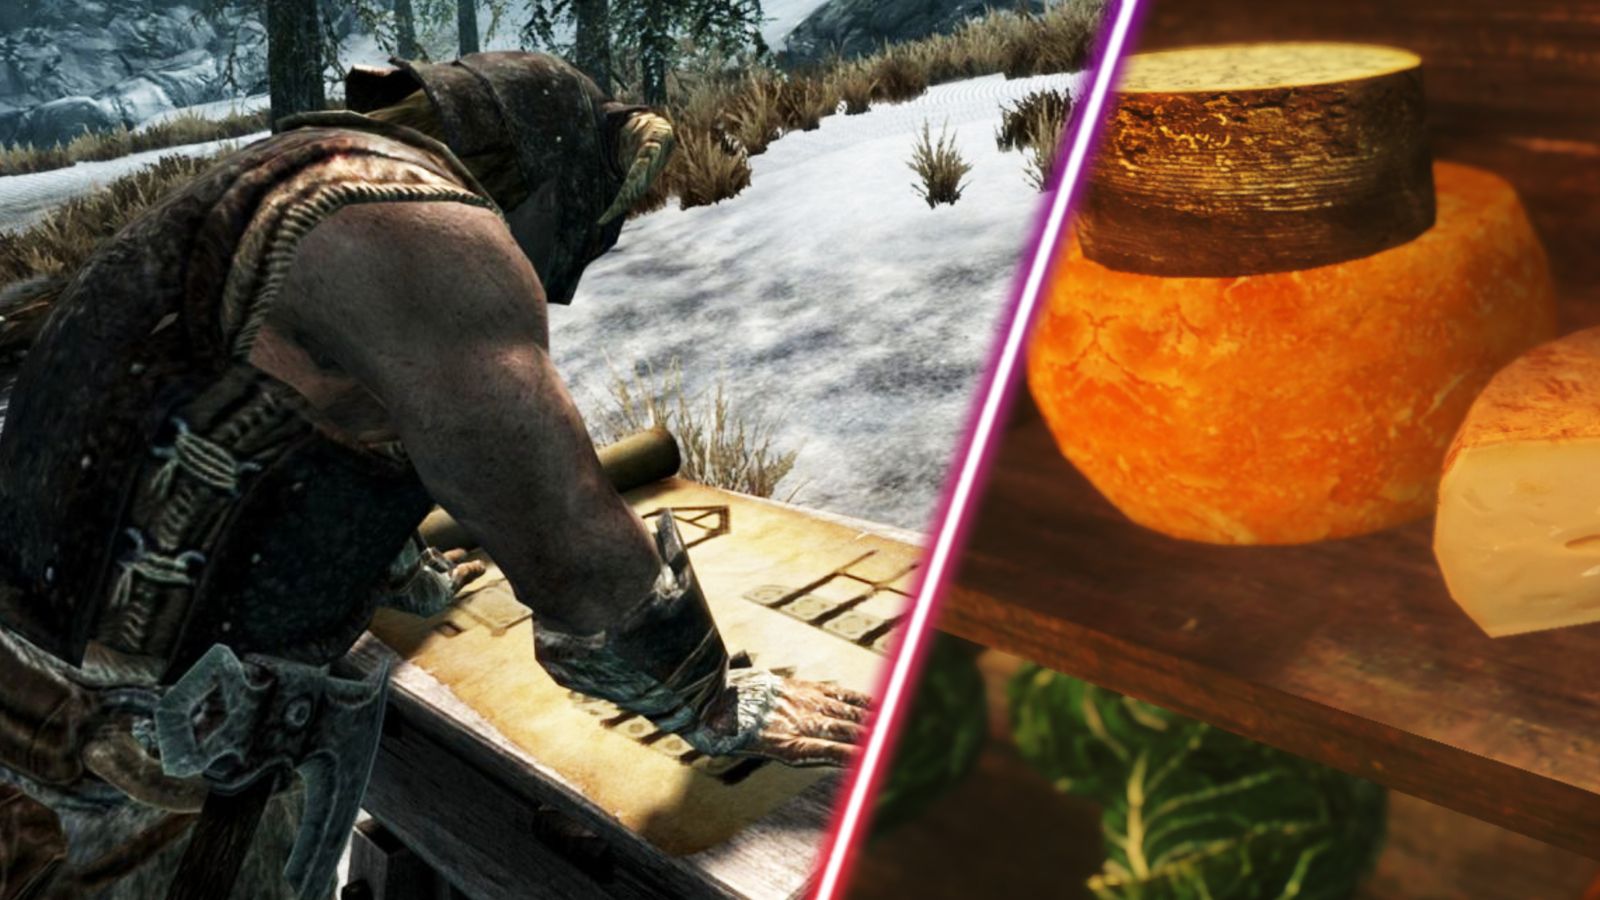 Some cheese wheels in Skyrim.